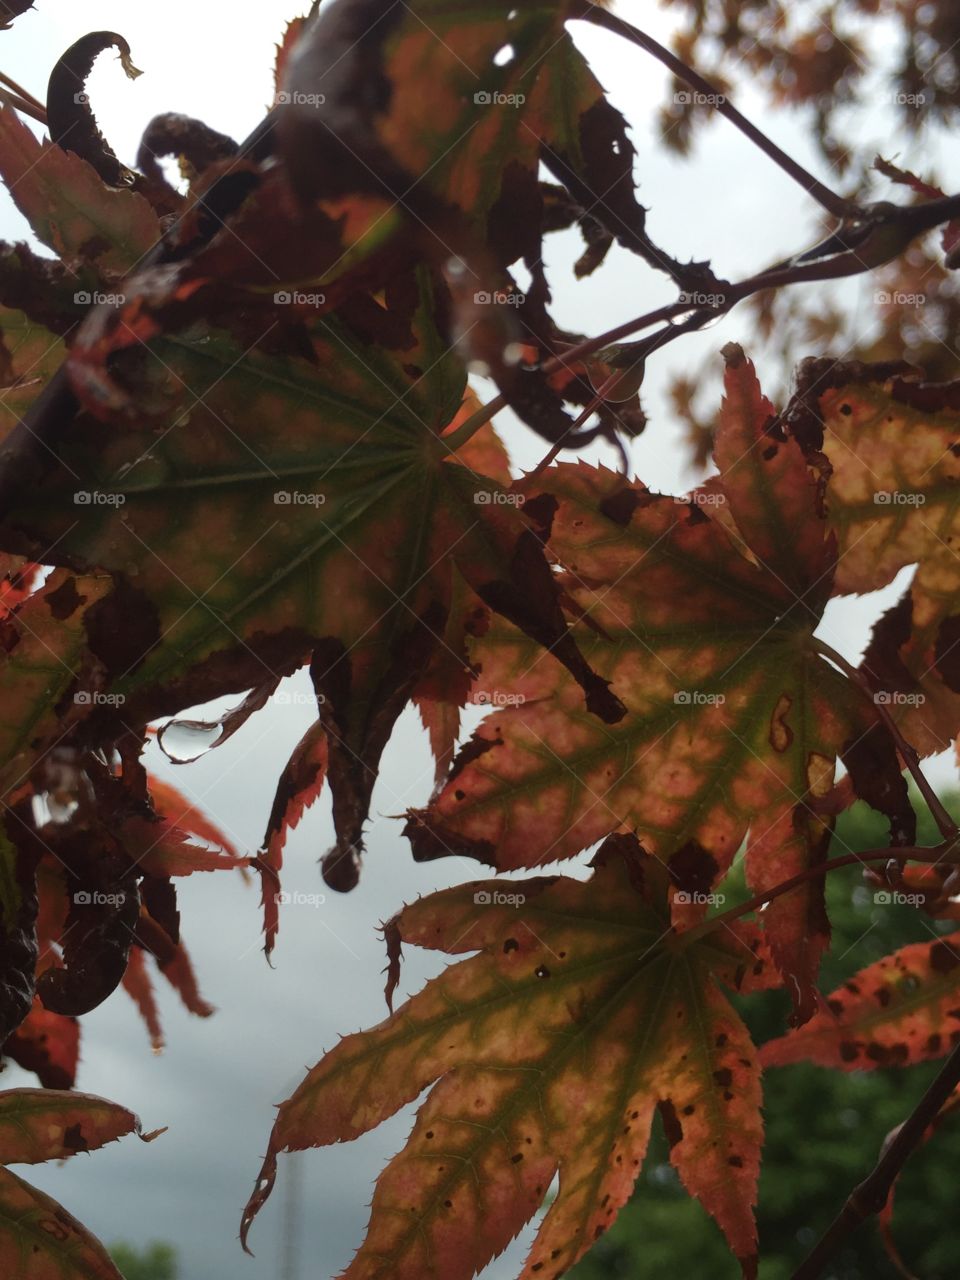 These leaves definitely say "Autumn".  They are perfect for a seasonal background, looking up at a gray sky.